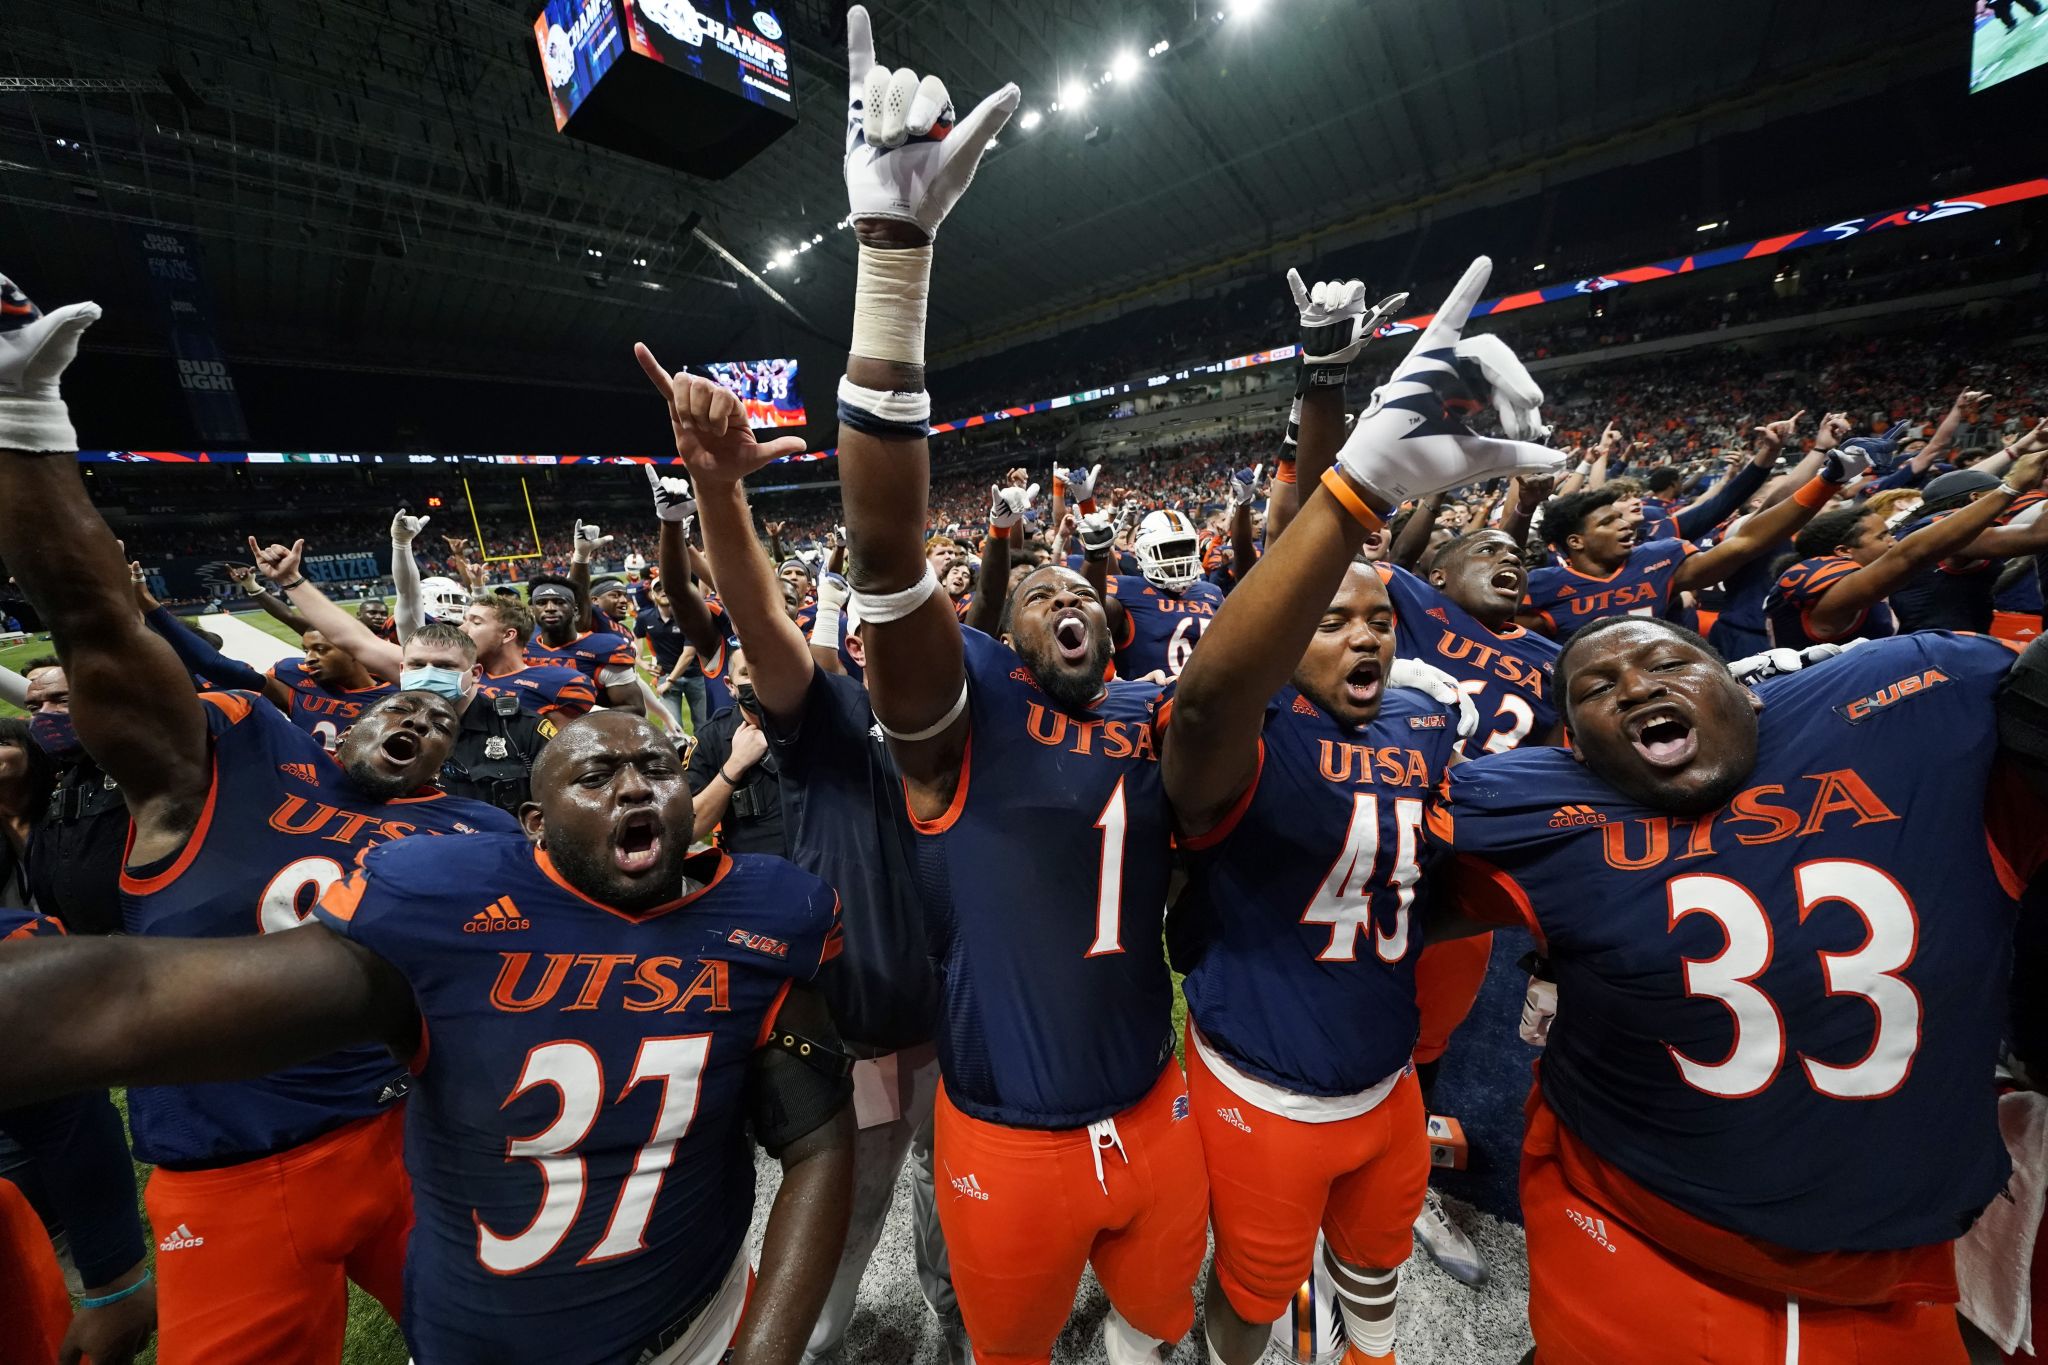 How to watch UTSA in Conference USA title game